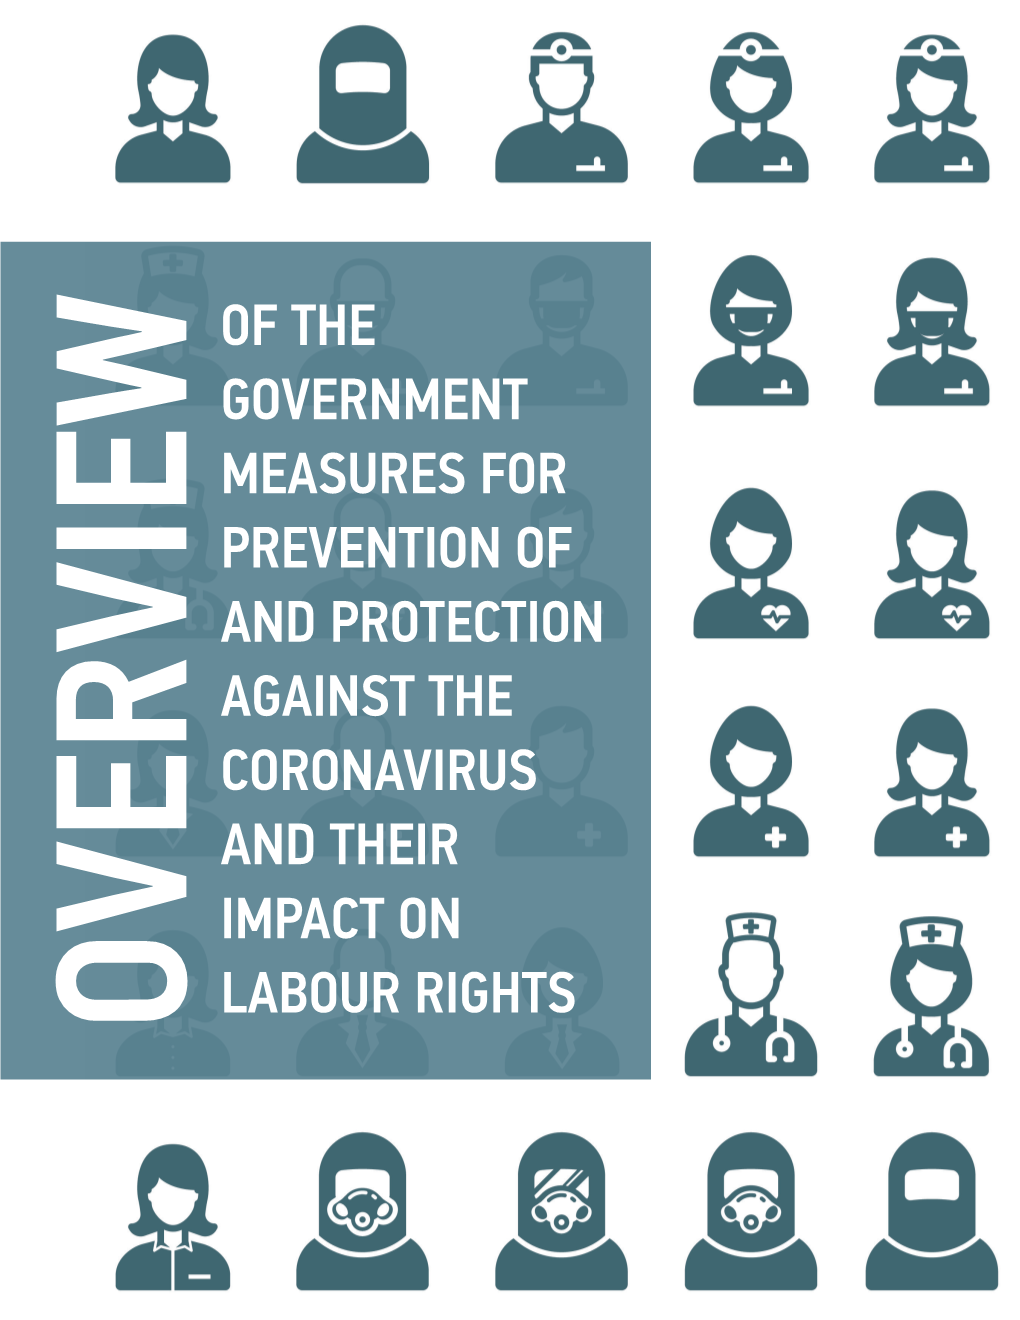 Overview of the Government Measures for Prevention of and Protection